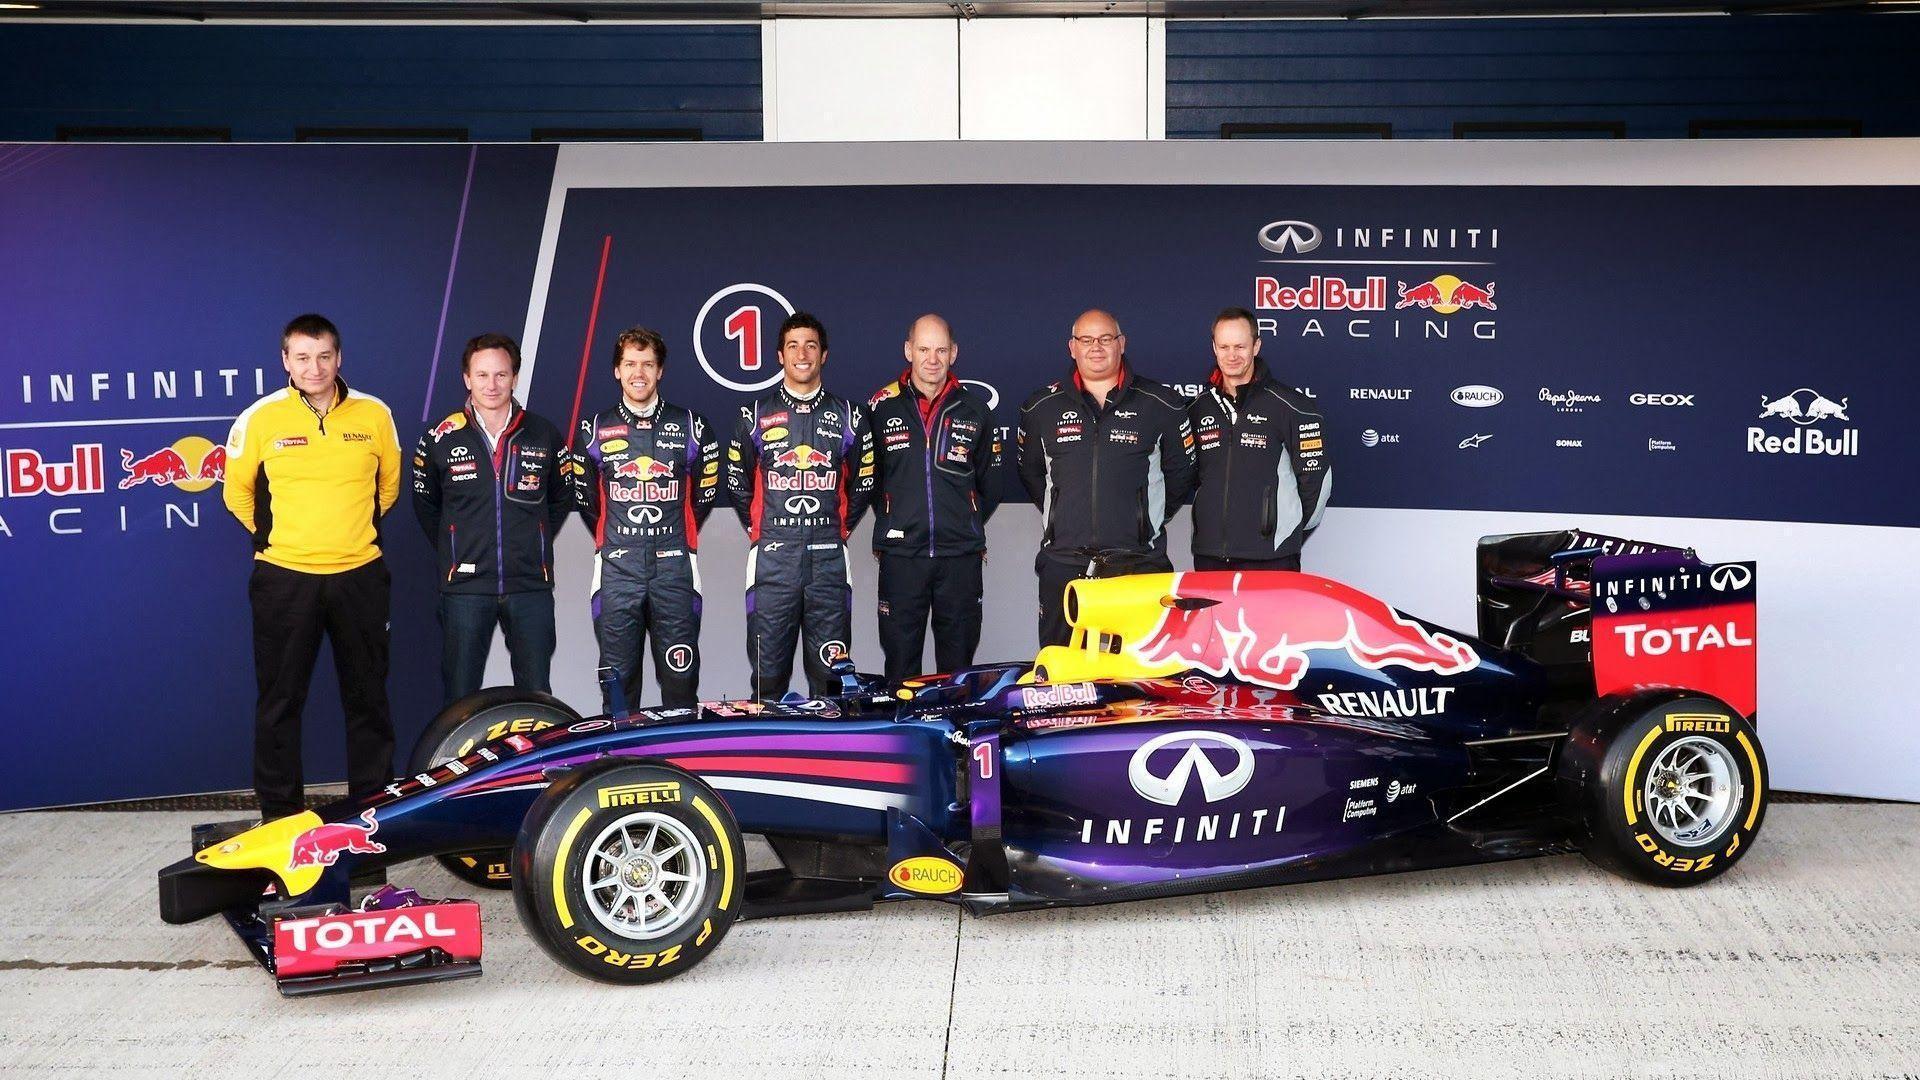 Red Bull RB10 F1 car launch picture